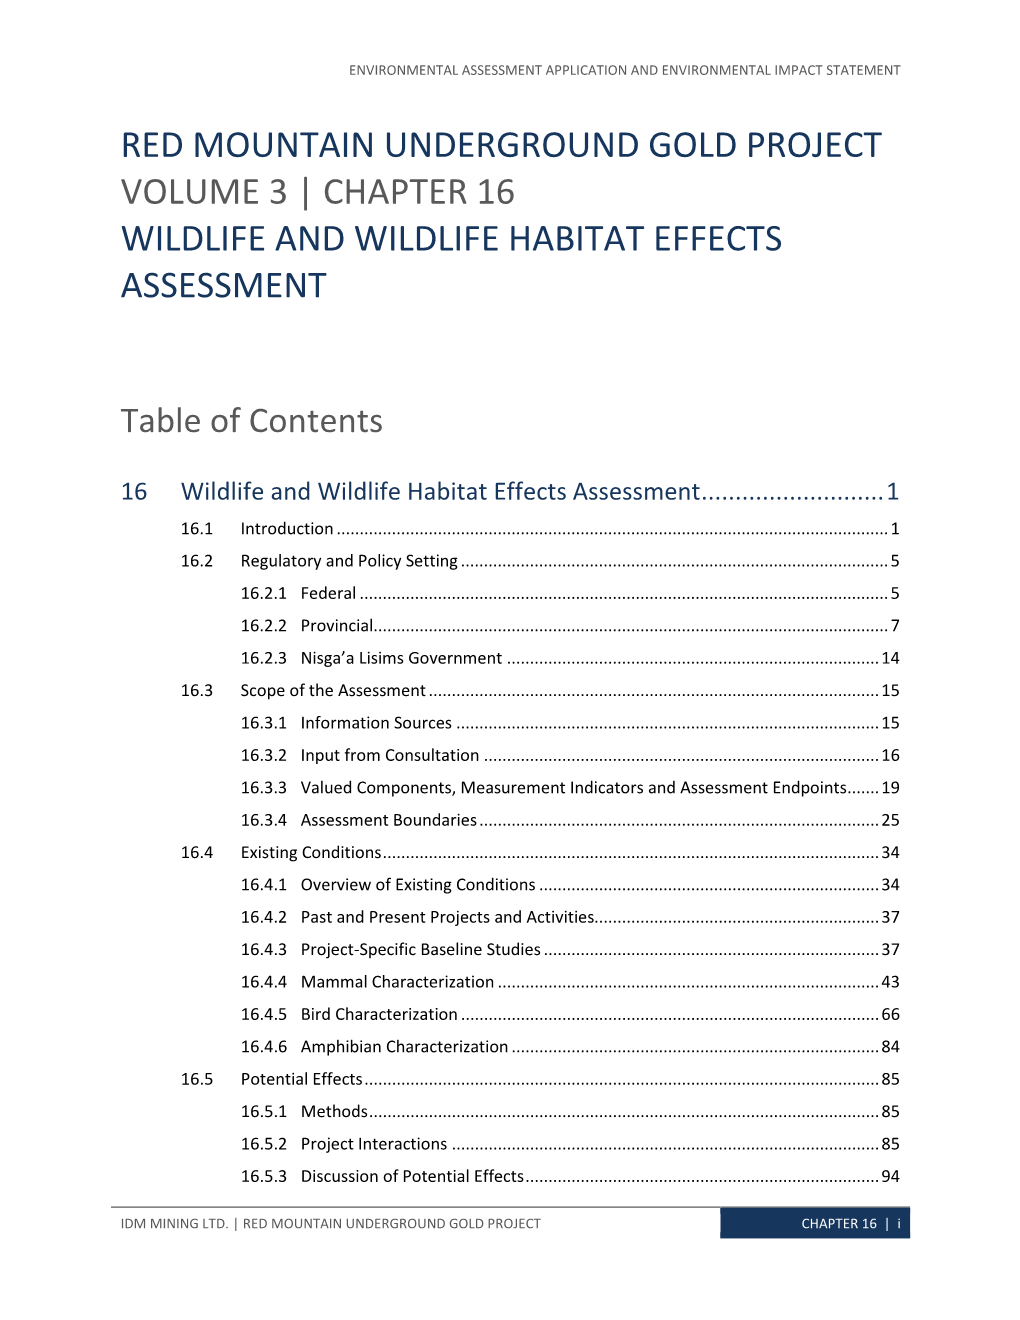 Red Mountain Underground Gold Project Volume 3 | Chapter 16 Wildlife and Wildlife Habitat Effects Assessment